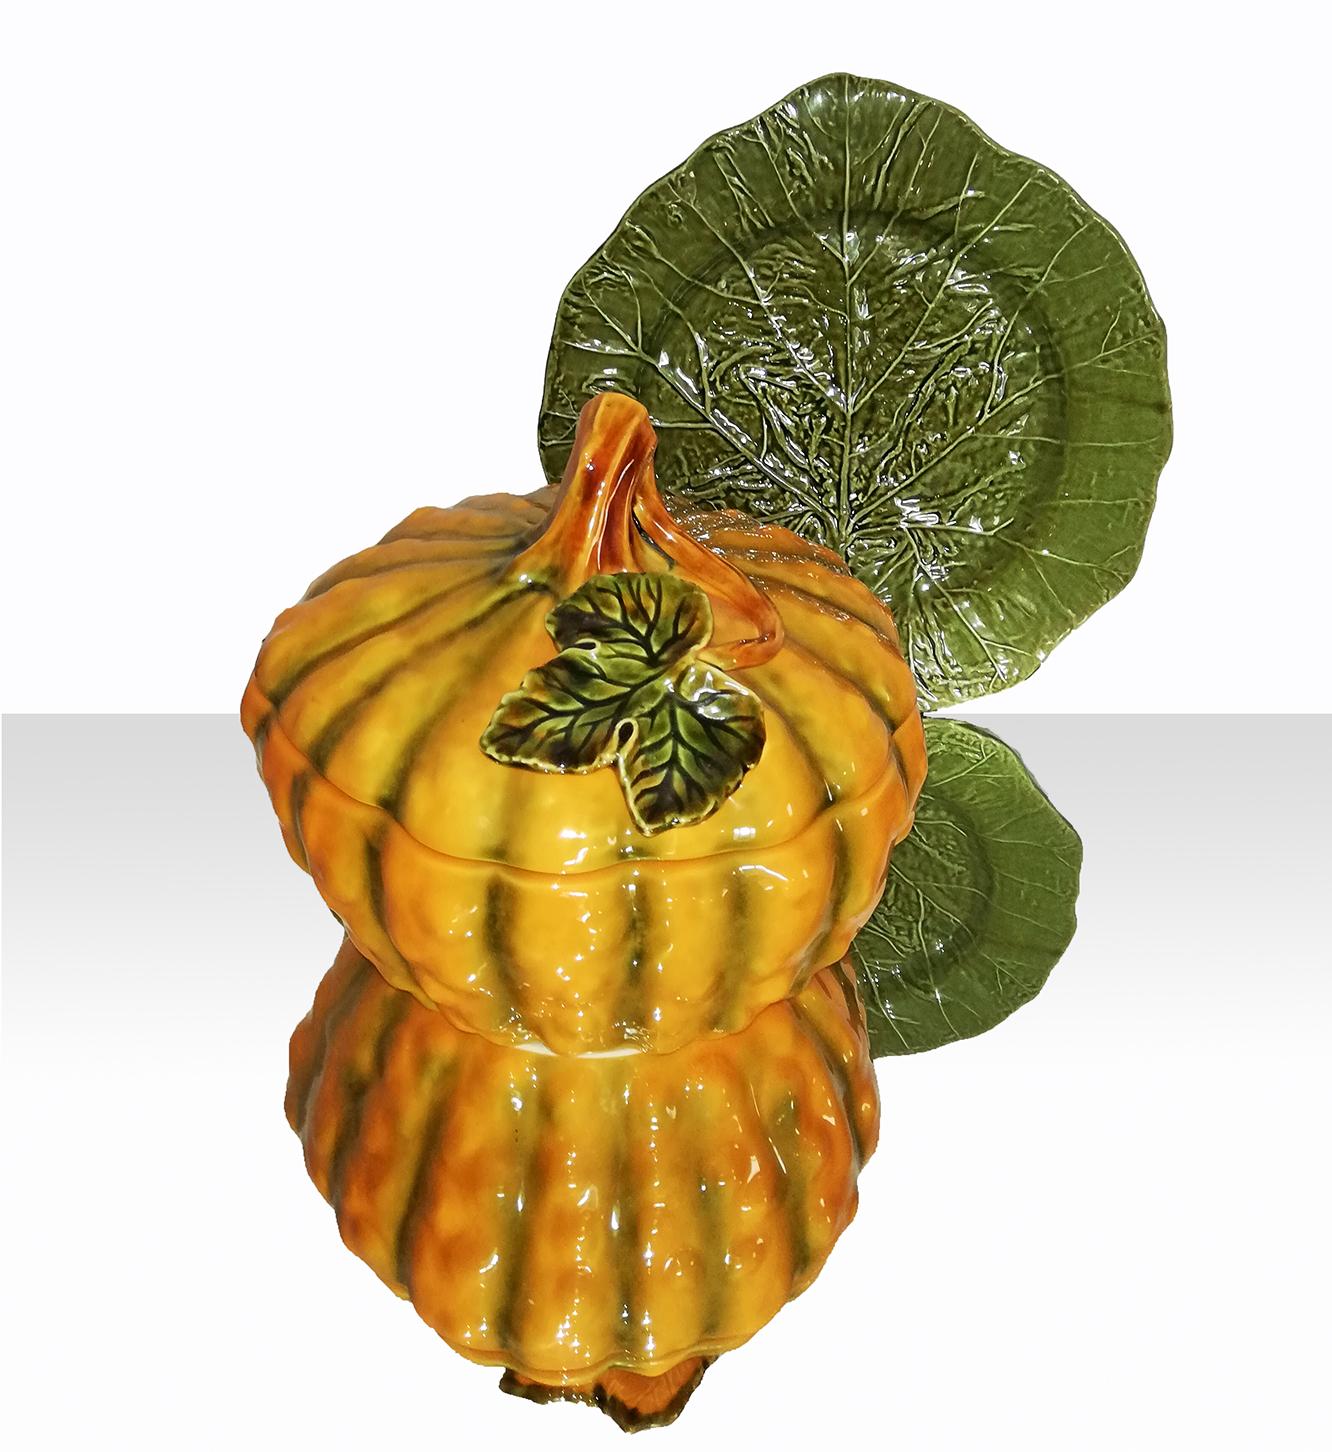 A lovely vintage set of Majolica glazed ceramic Pumpkin in green and yellow colors. Manufactured in Portugal al the 1980s. With polychrome decoration in relief of leaves.
Portugal, 1980s.
Tureen
Measures tureen:
Diameter 11 in /30 cm
Height 8.7